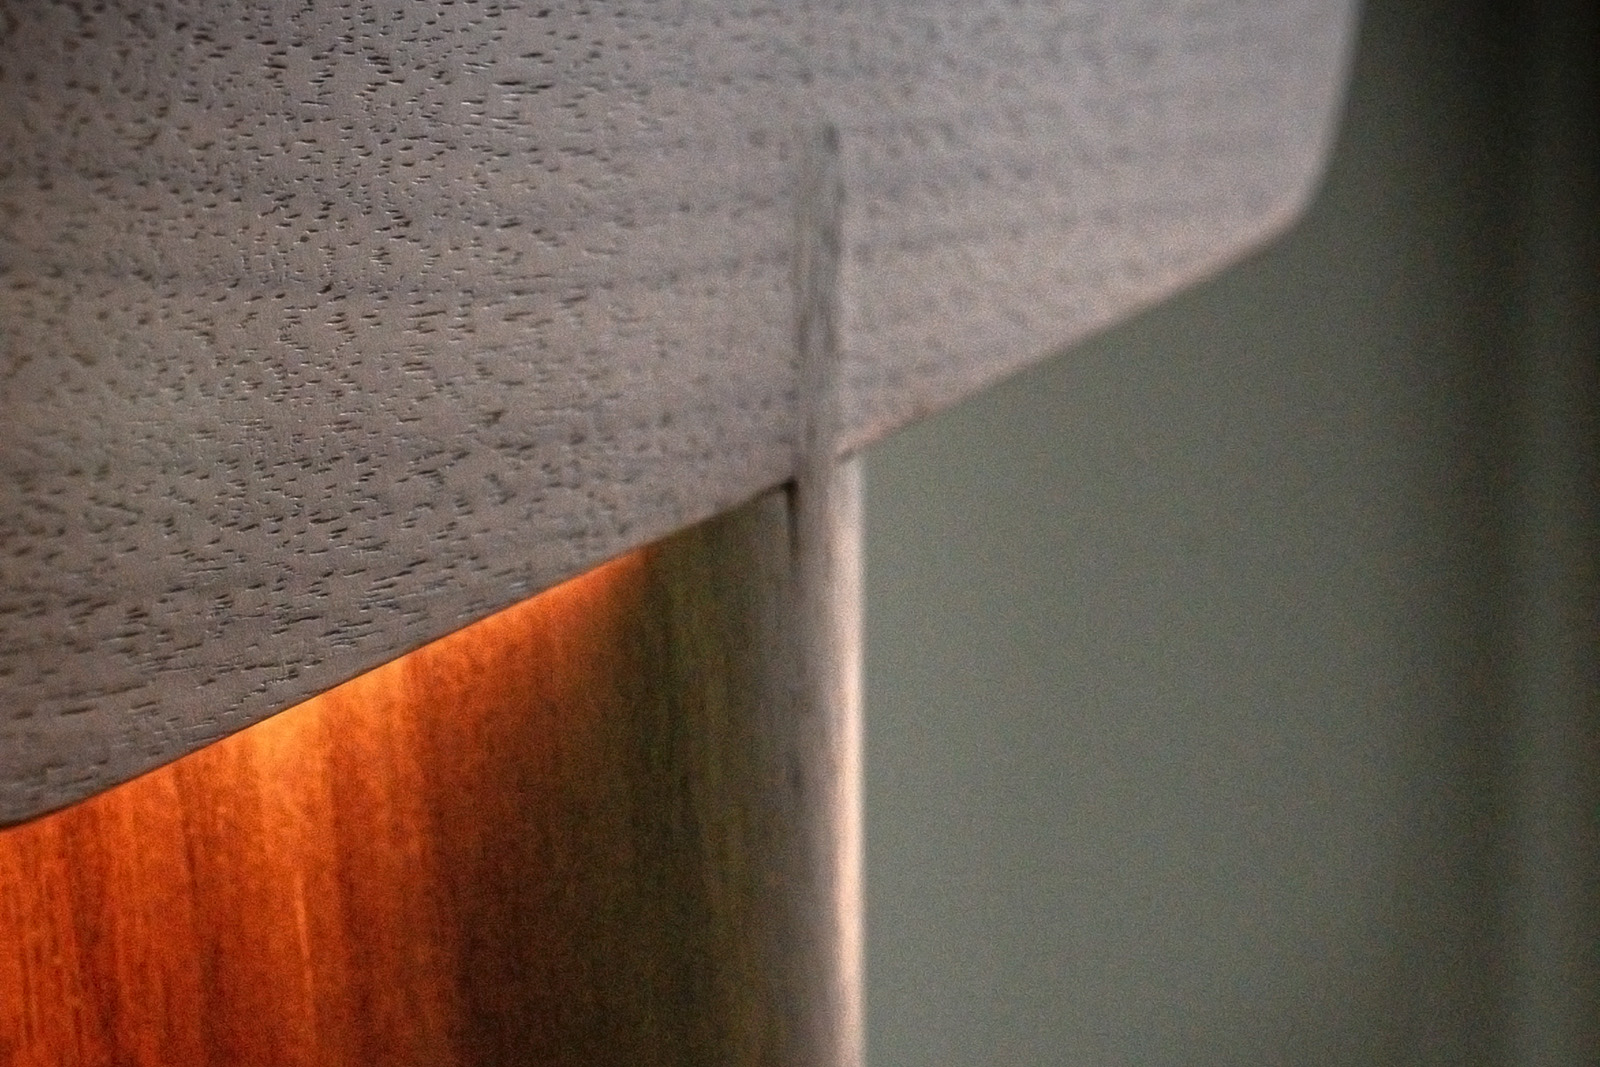 A detailed close-up of the wooden lamp shade.